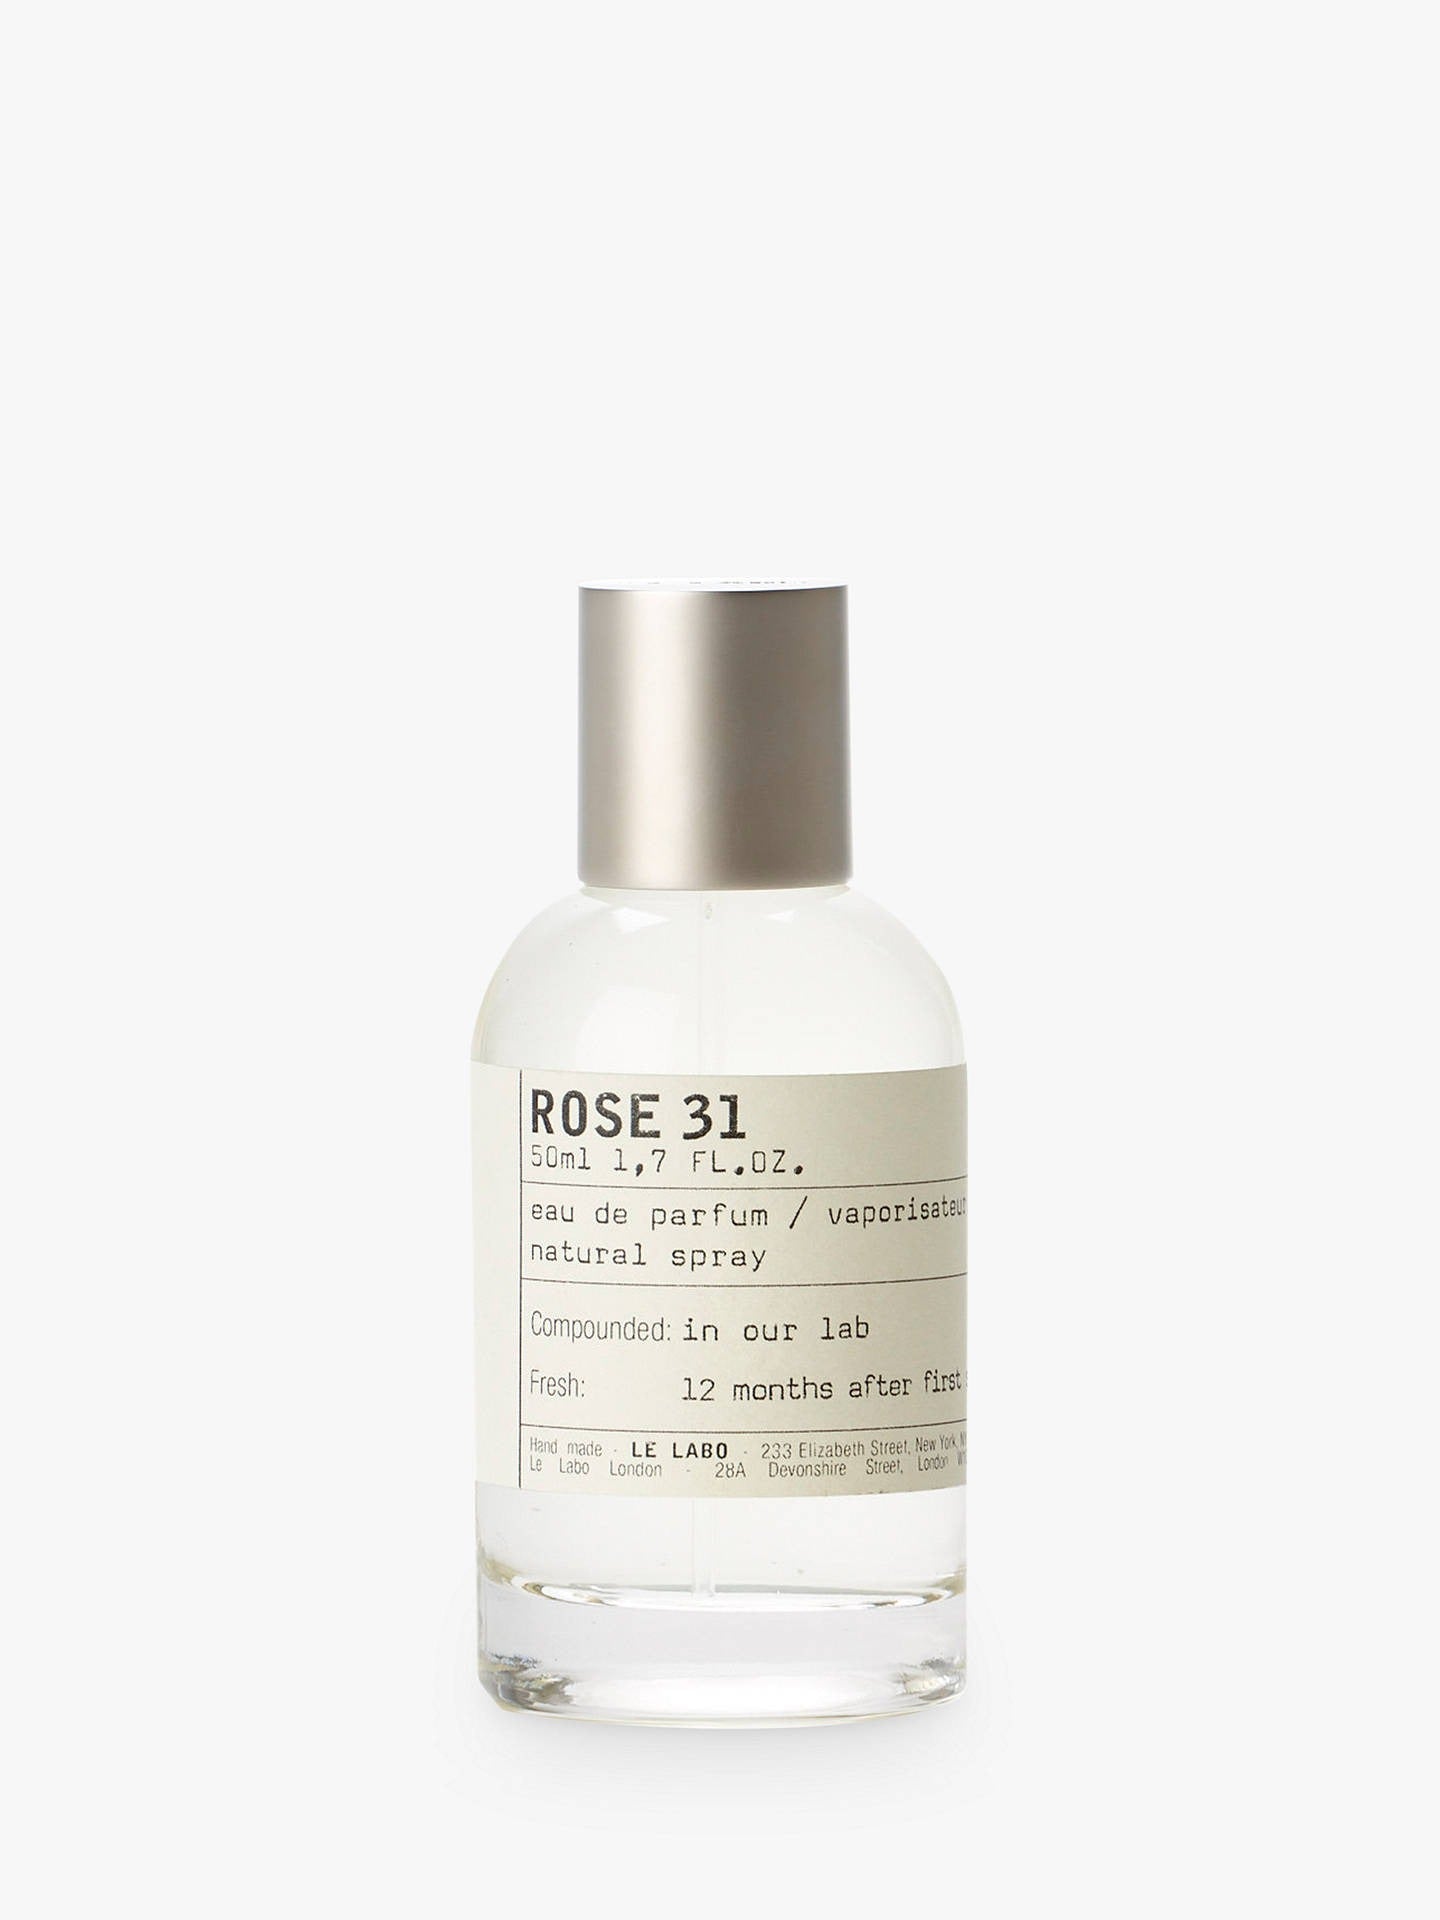 Rose 31 Brand New Without Box